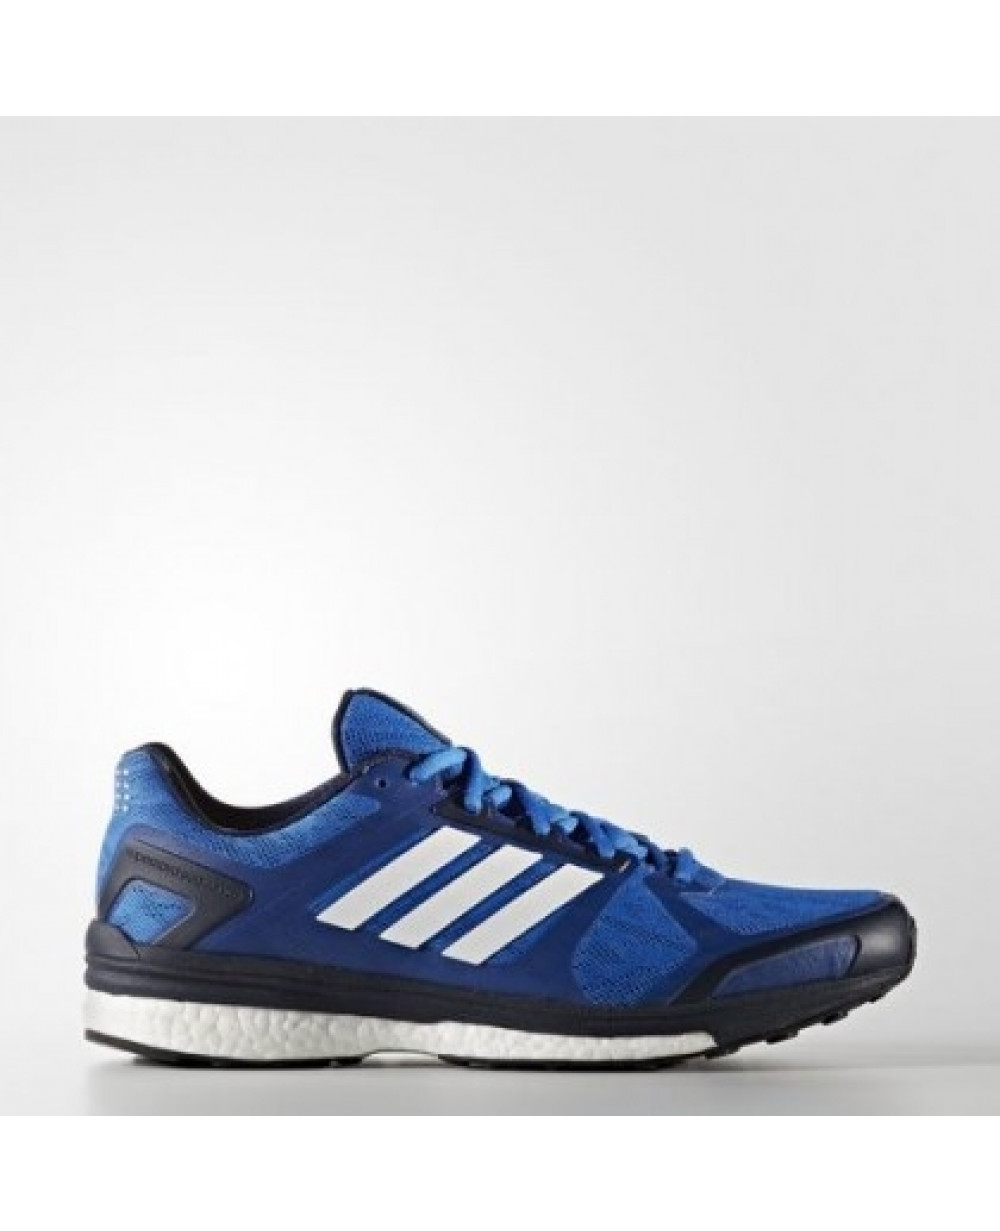 Adidas Supernova Sequence 9 Running Shoes For Men BB1614